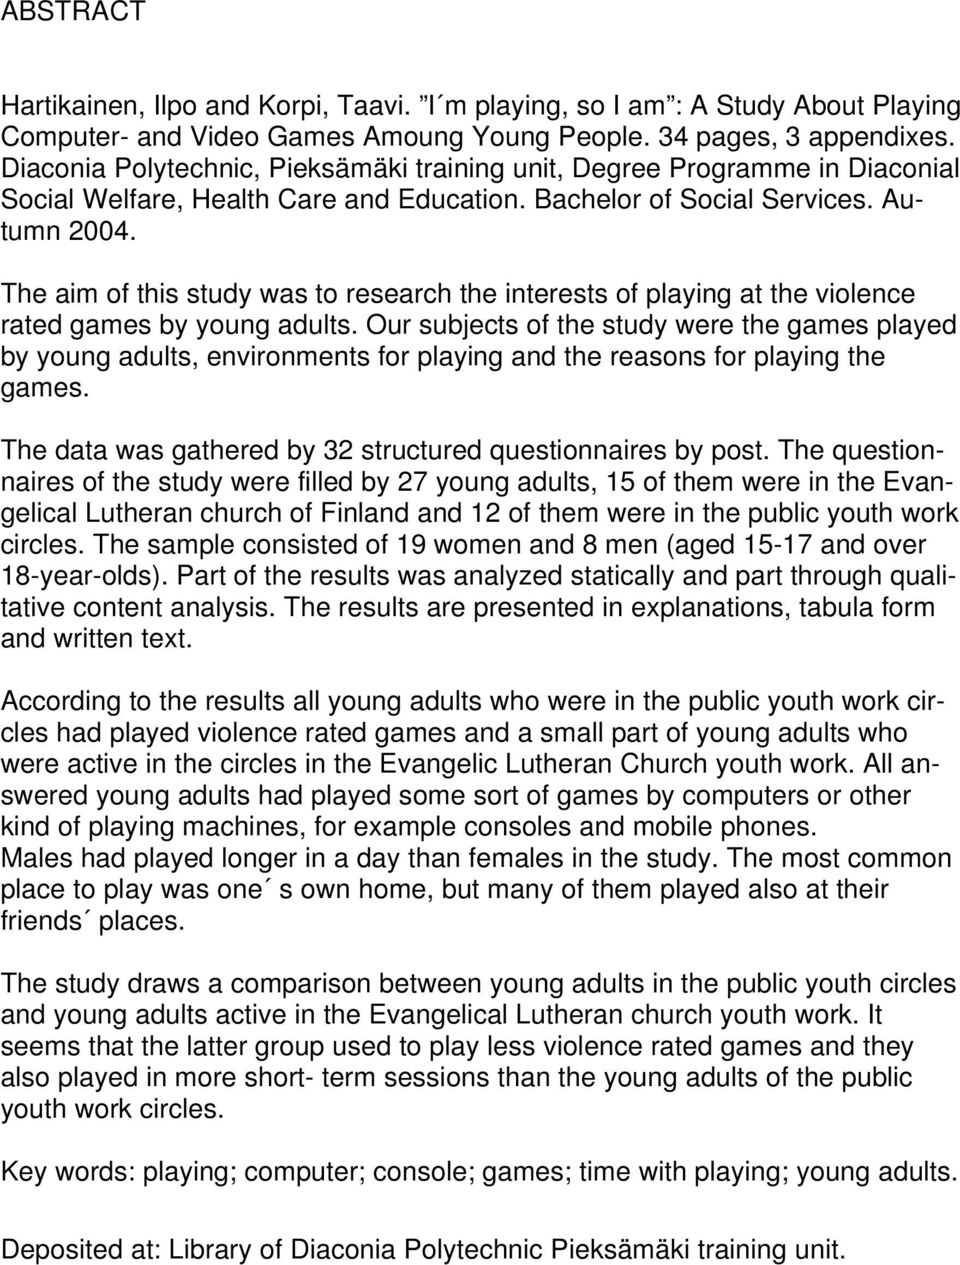 The aim of this study was to research the interests of playing at the violence rated games by young adults.